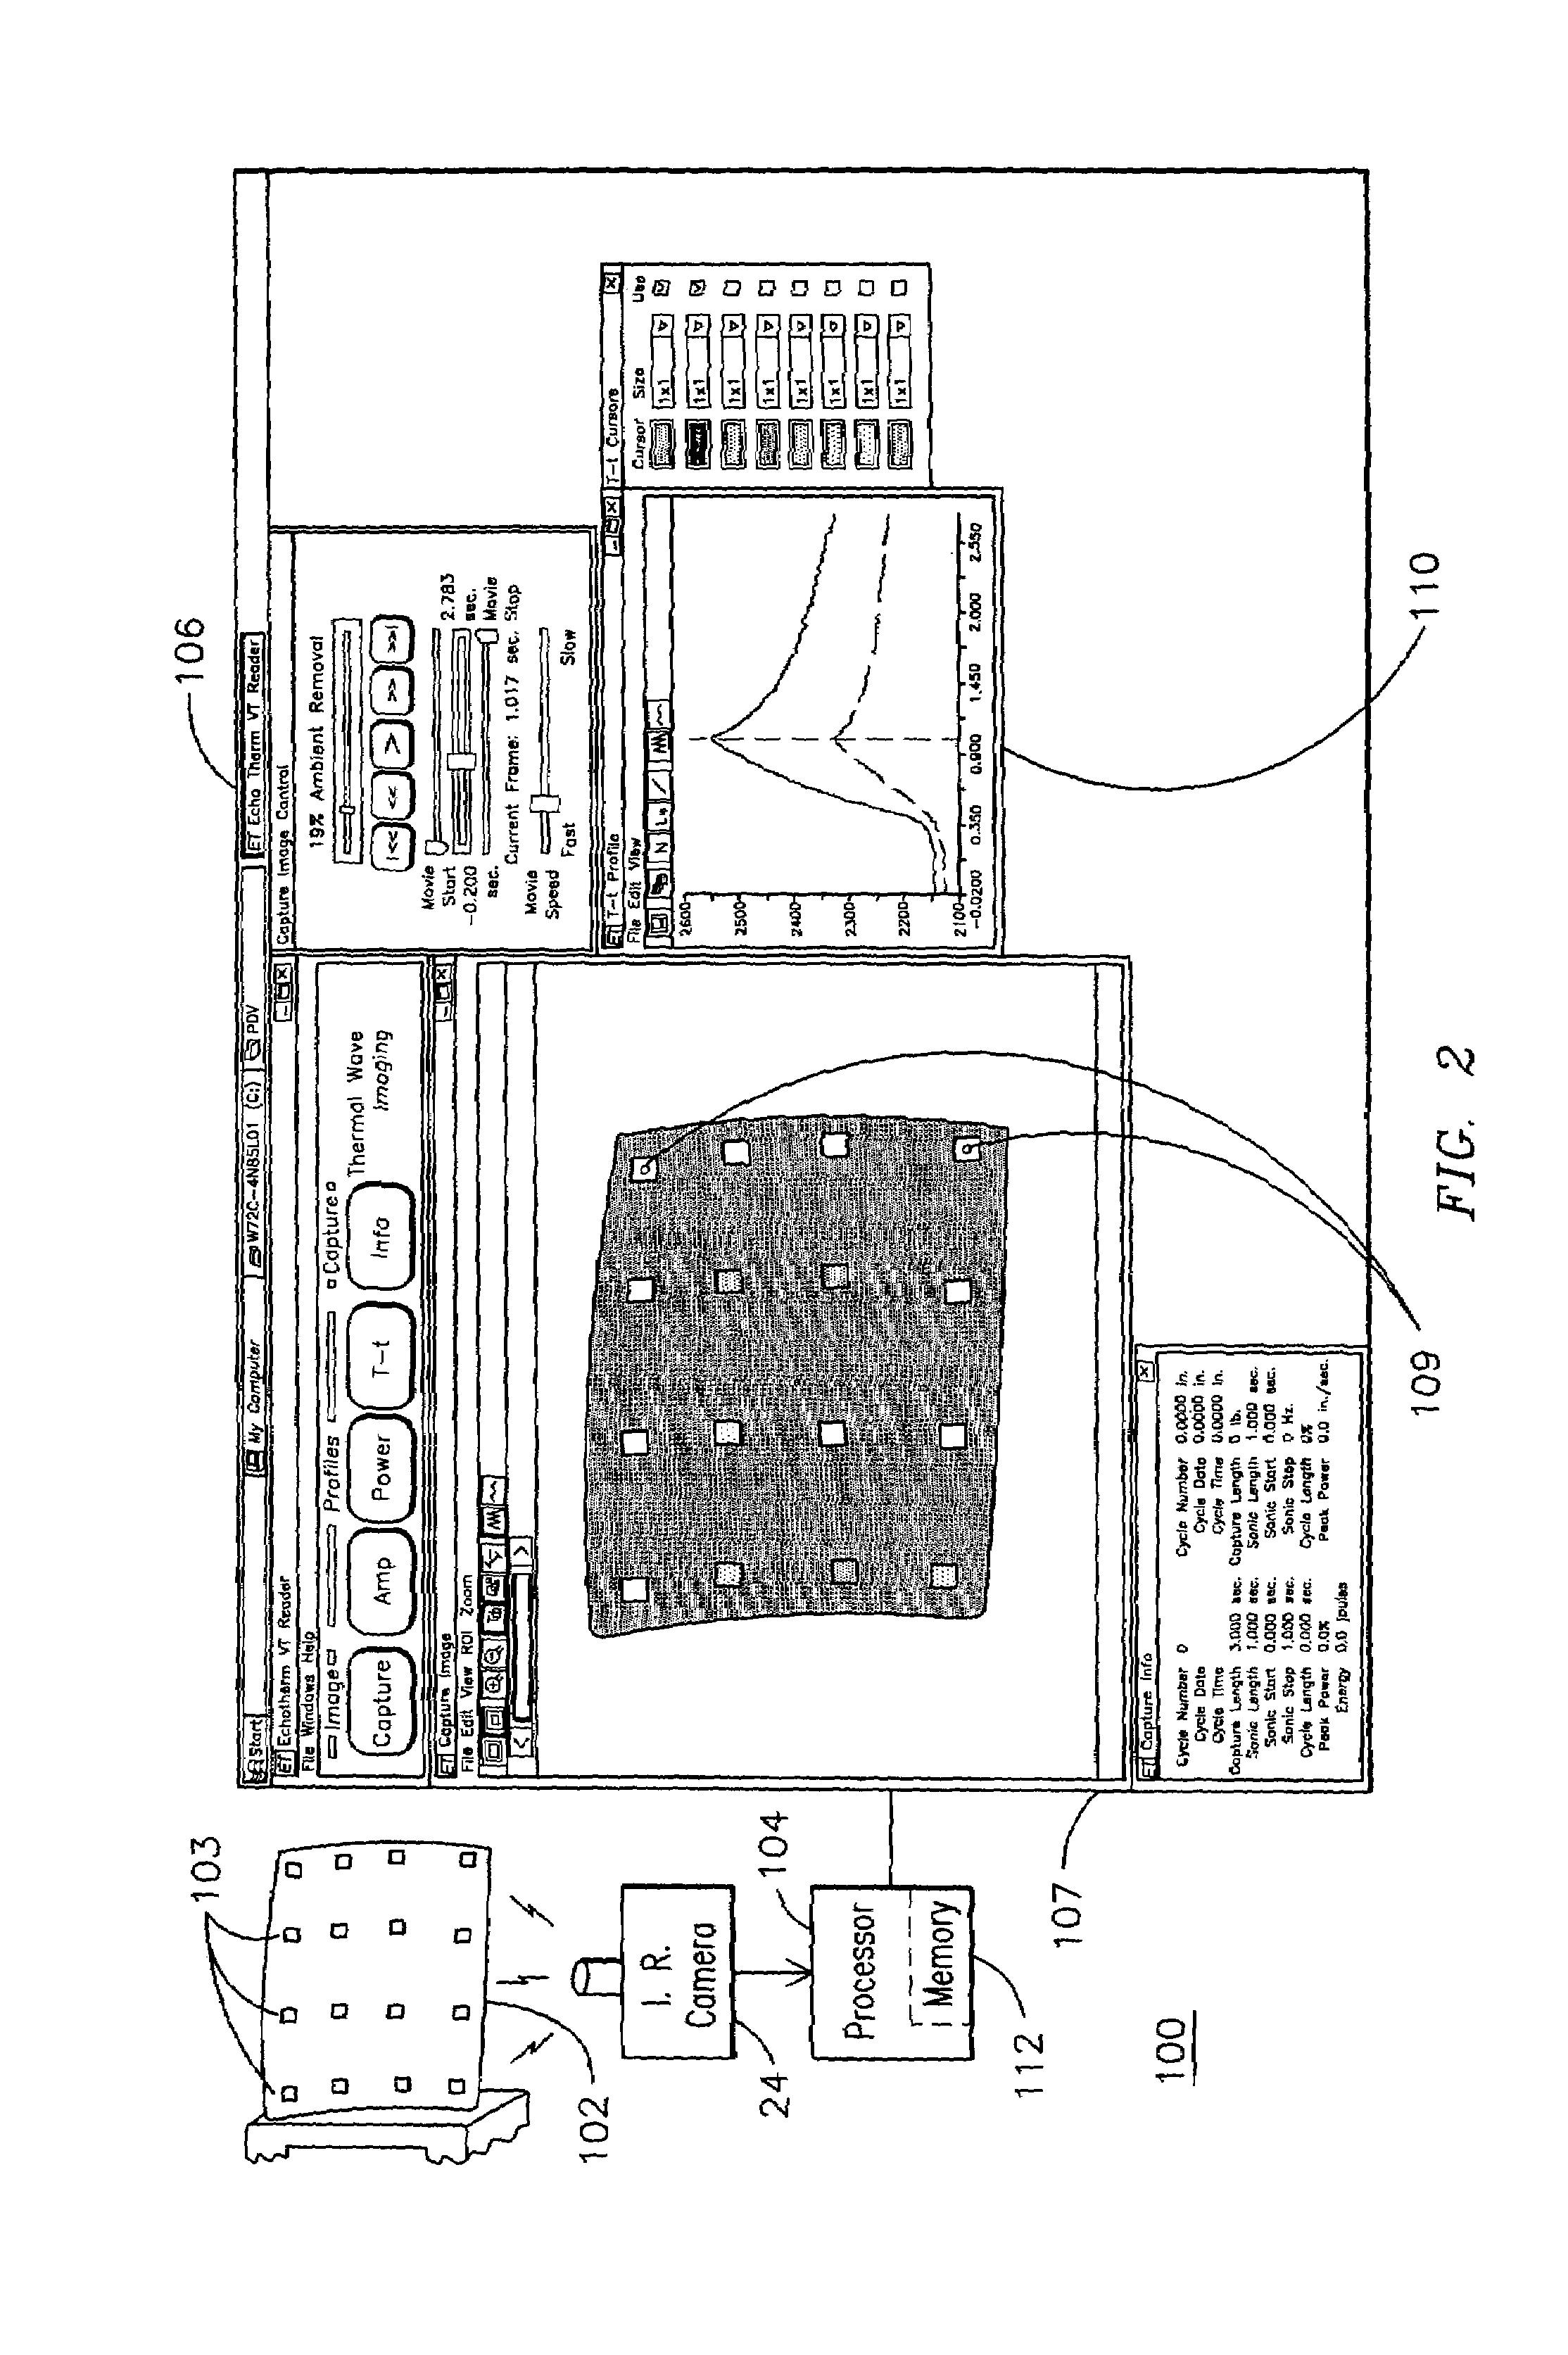 Method for calibrating and enhancing flaw detection of an acoustic thermography system